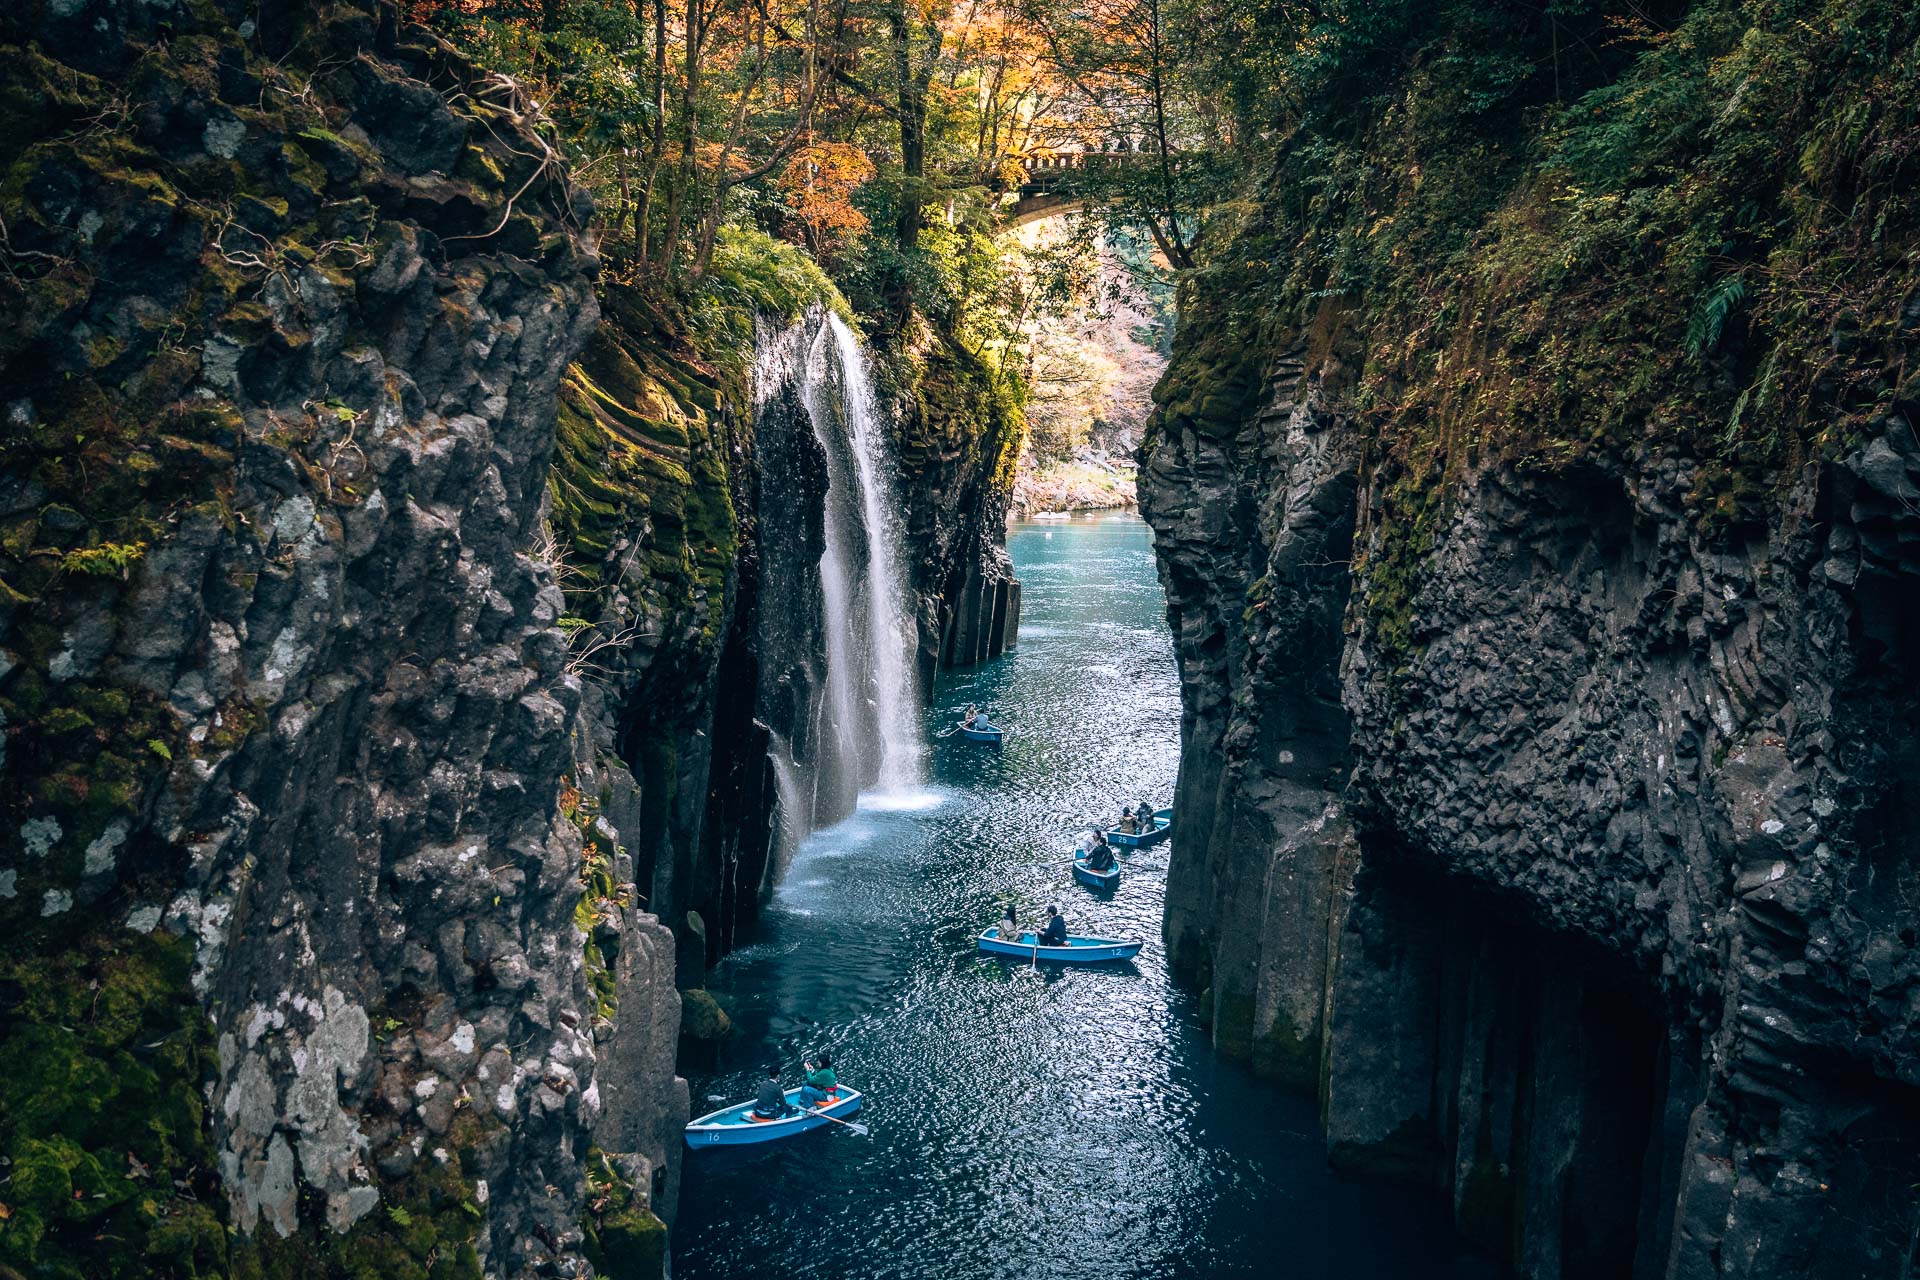 Takachiho Gorge - One of the most beautiful places in Japan